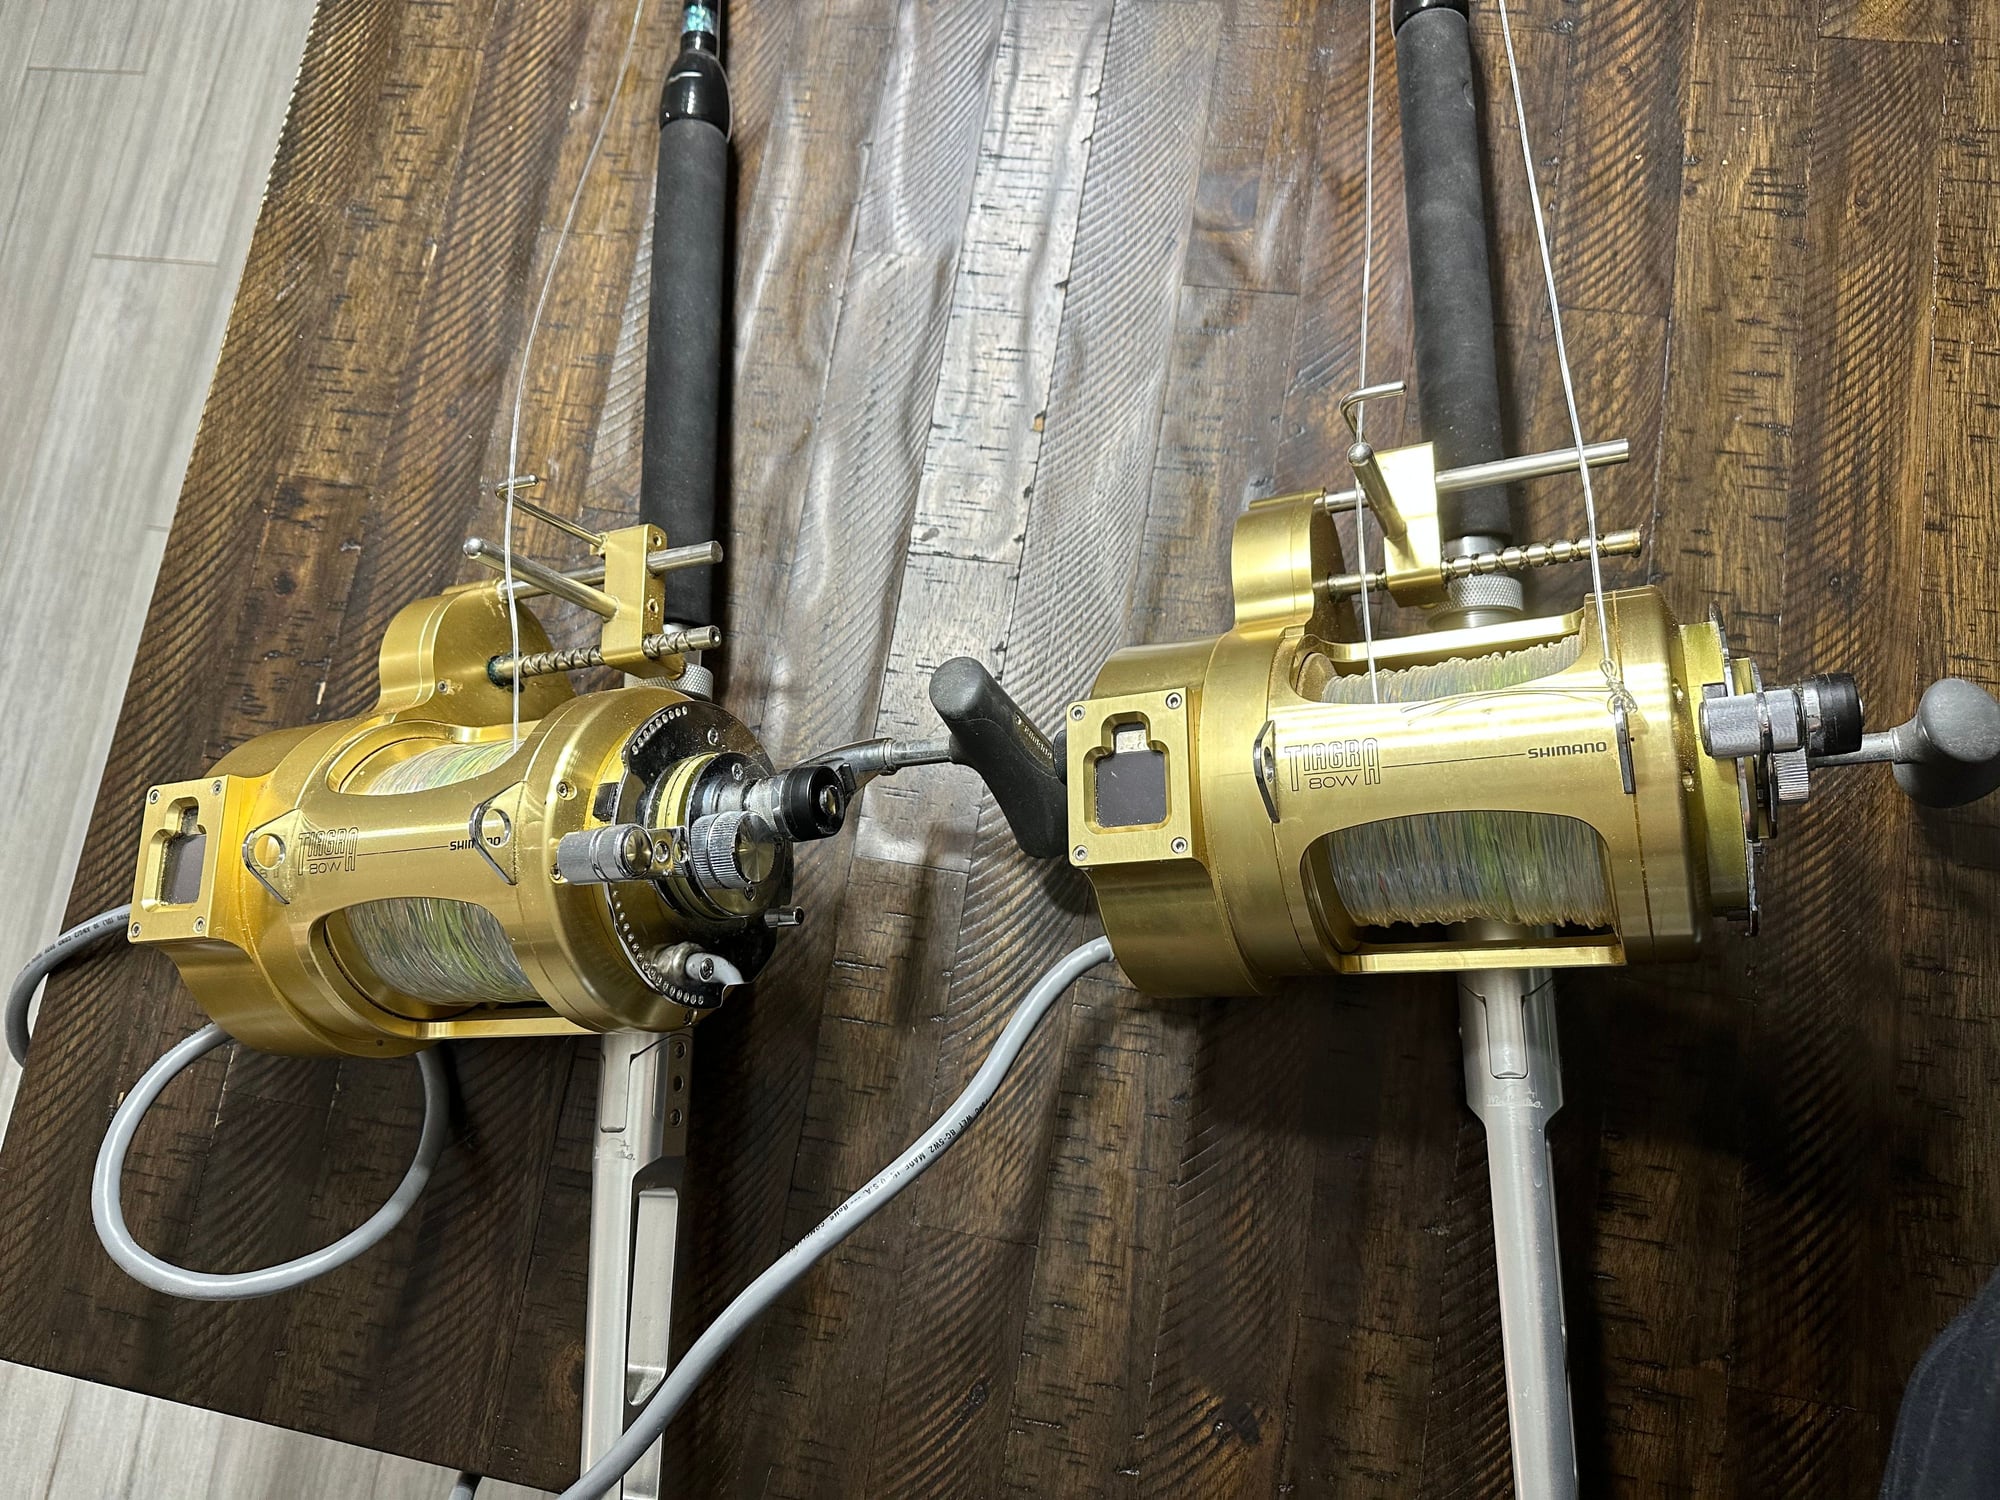 Hooker Electric Shimano 8's. Penn 50's & 30's. Accurate 50's on BlackBart  Reels - The Hull Truth - Boating and Fishing Forum